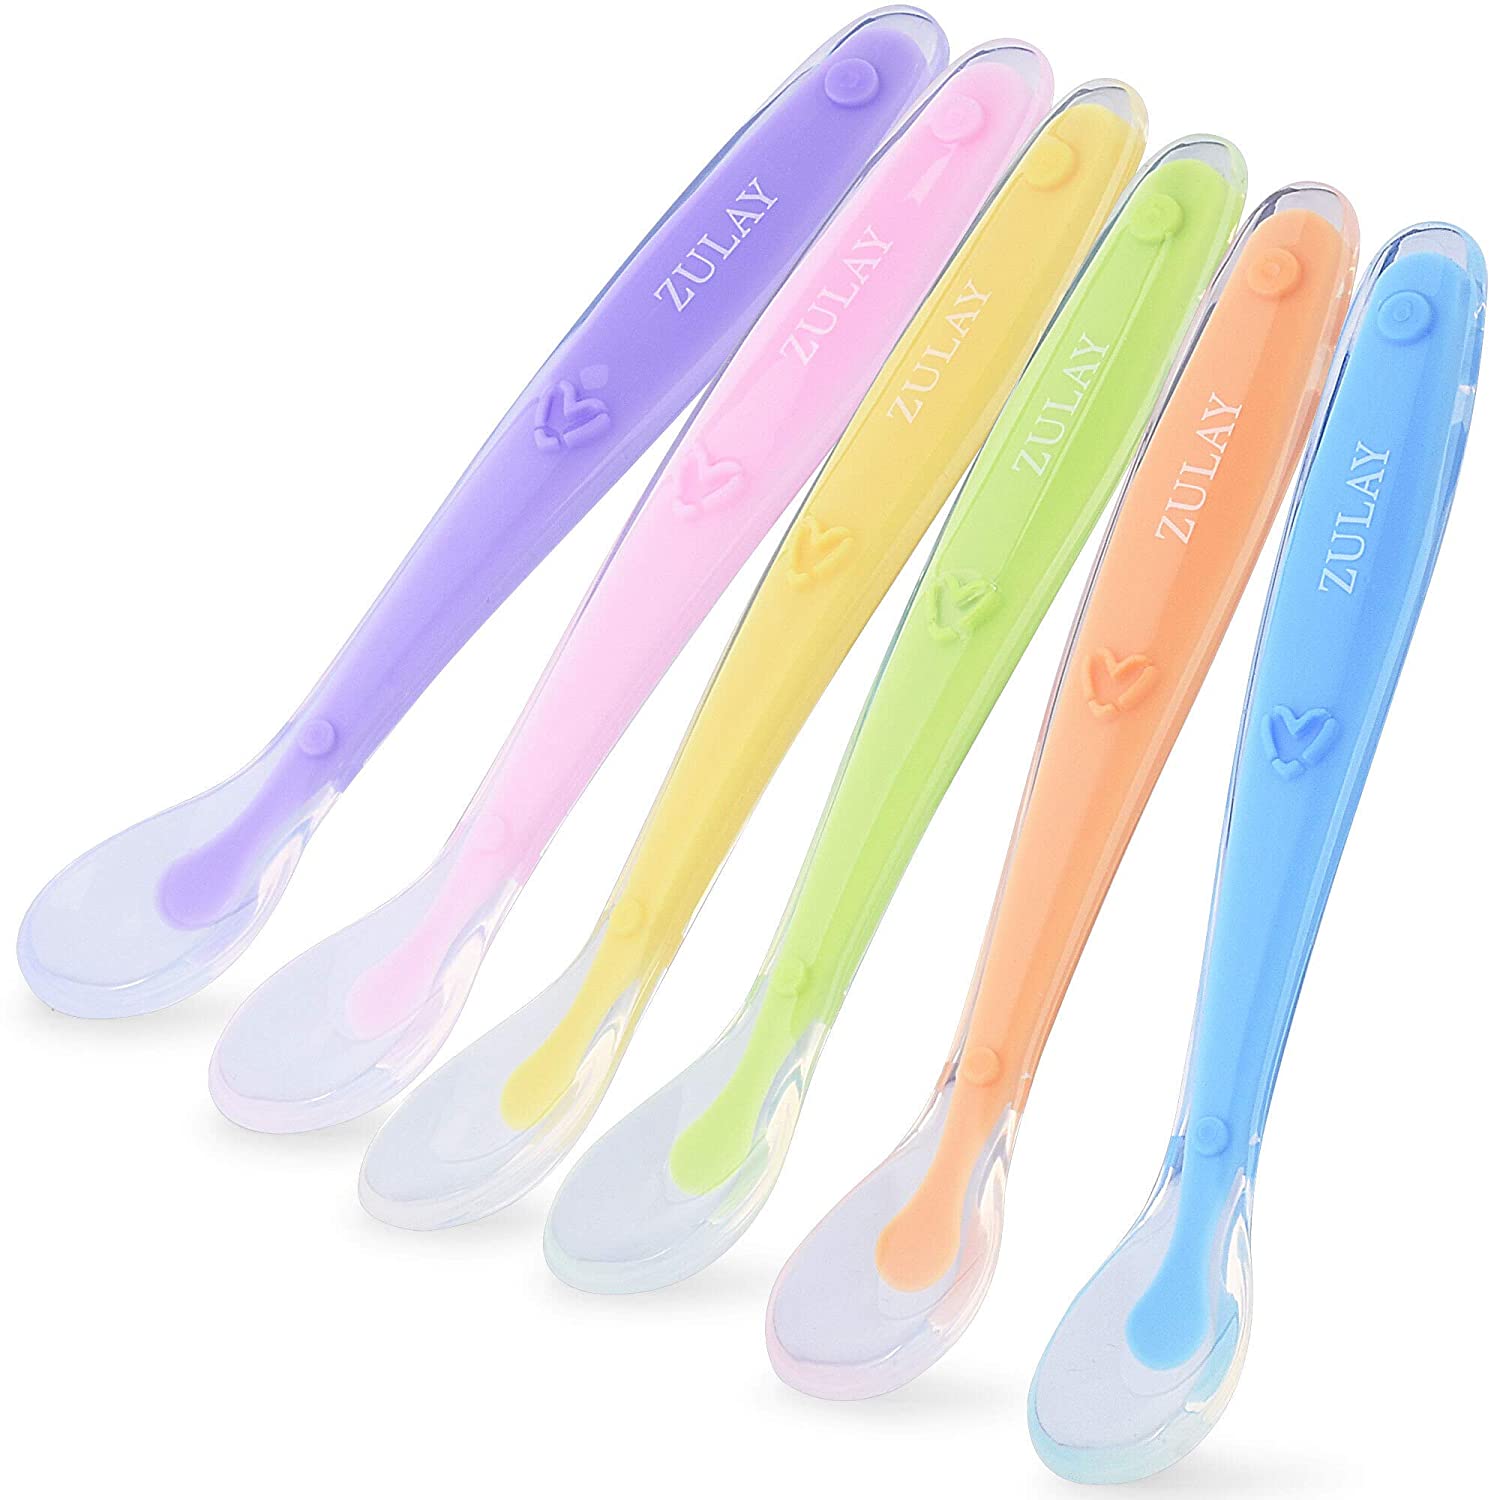 Busy Baby Teething Spoon – Baby Grand